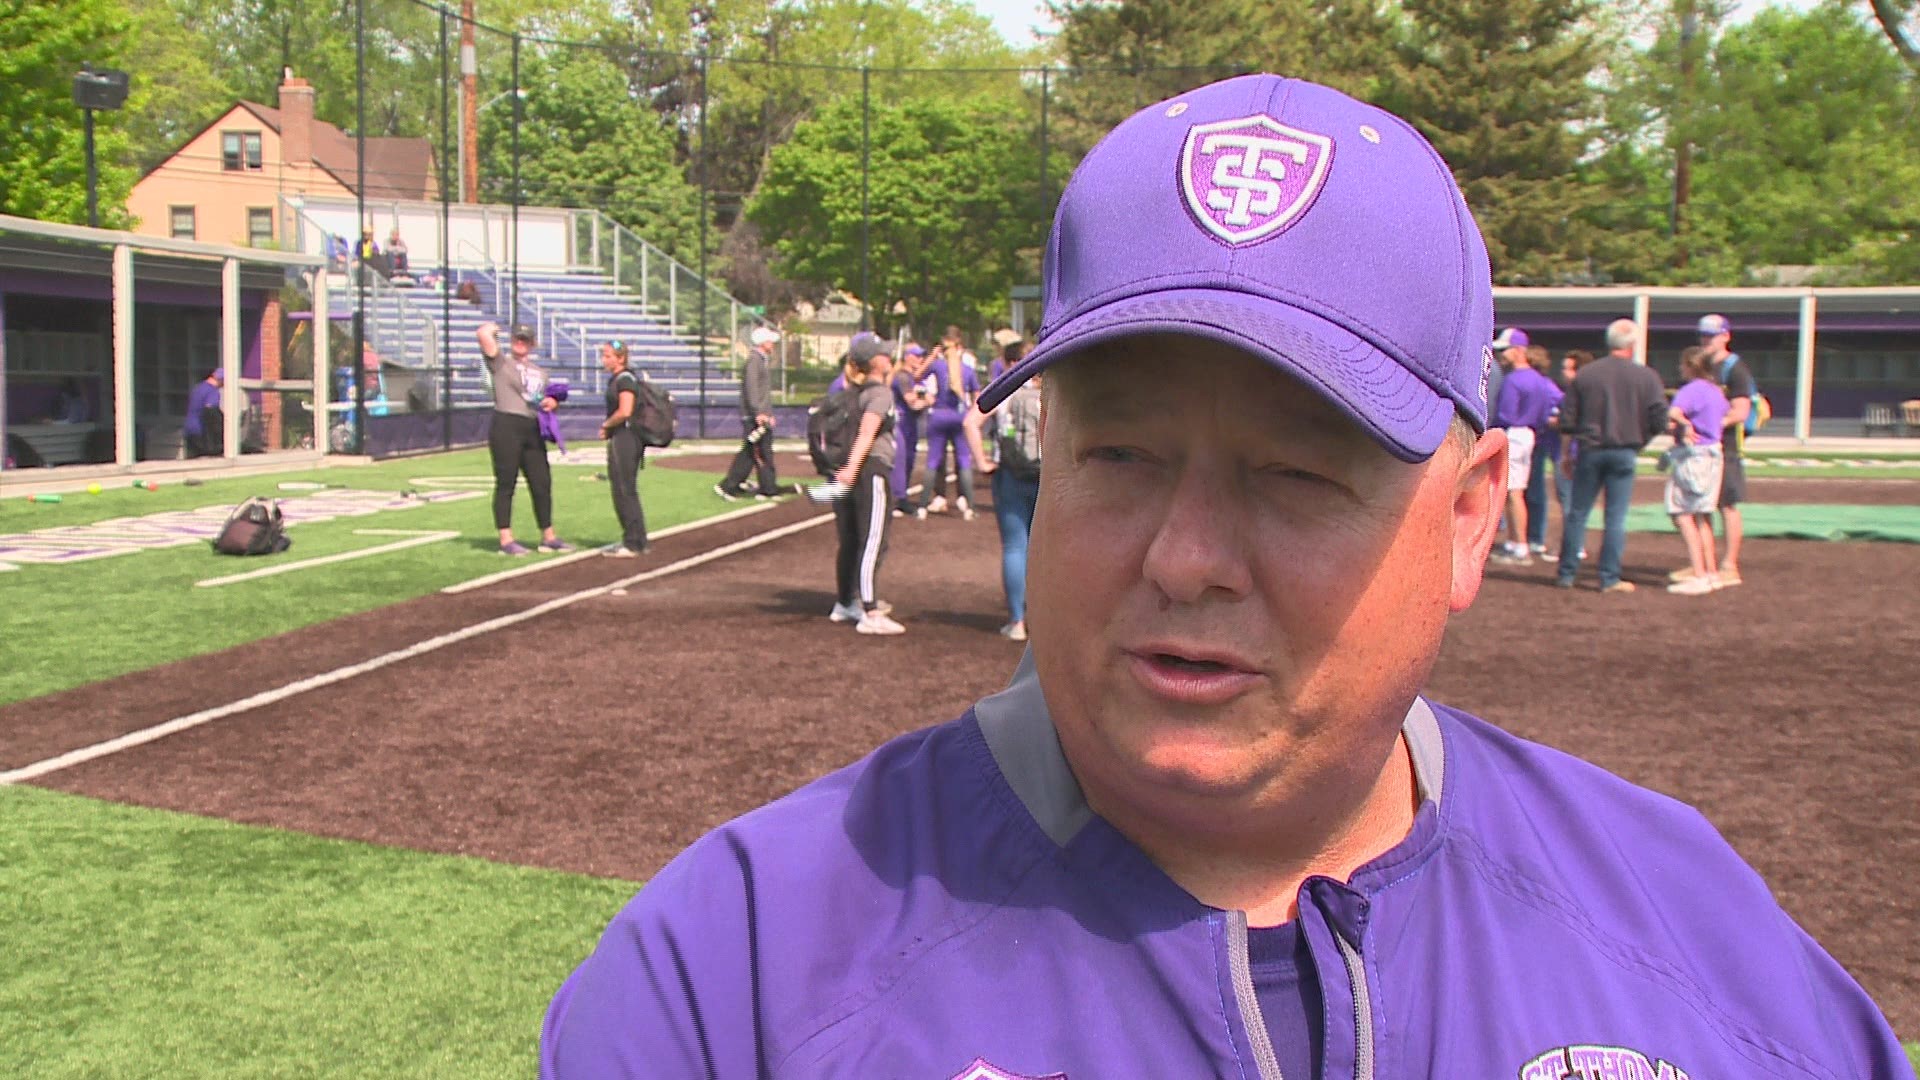 Tommies will play in the eight-team national tournament in Texas starting May 23rd.